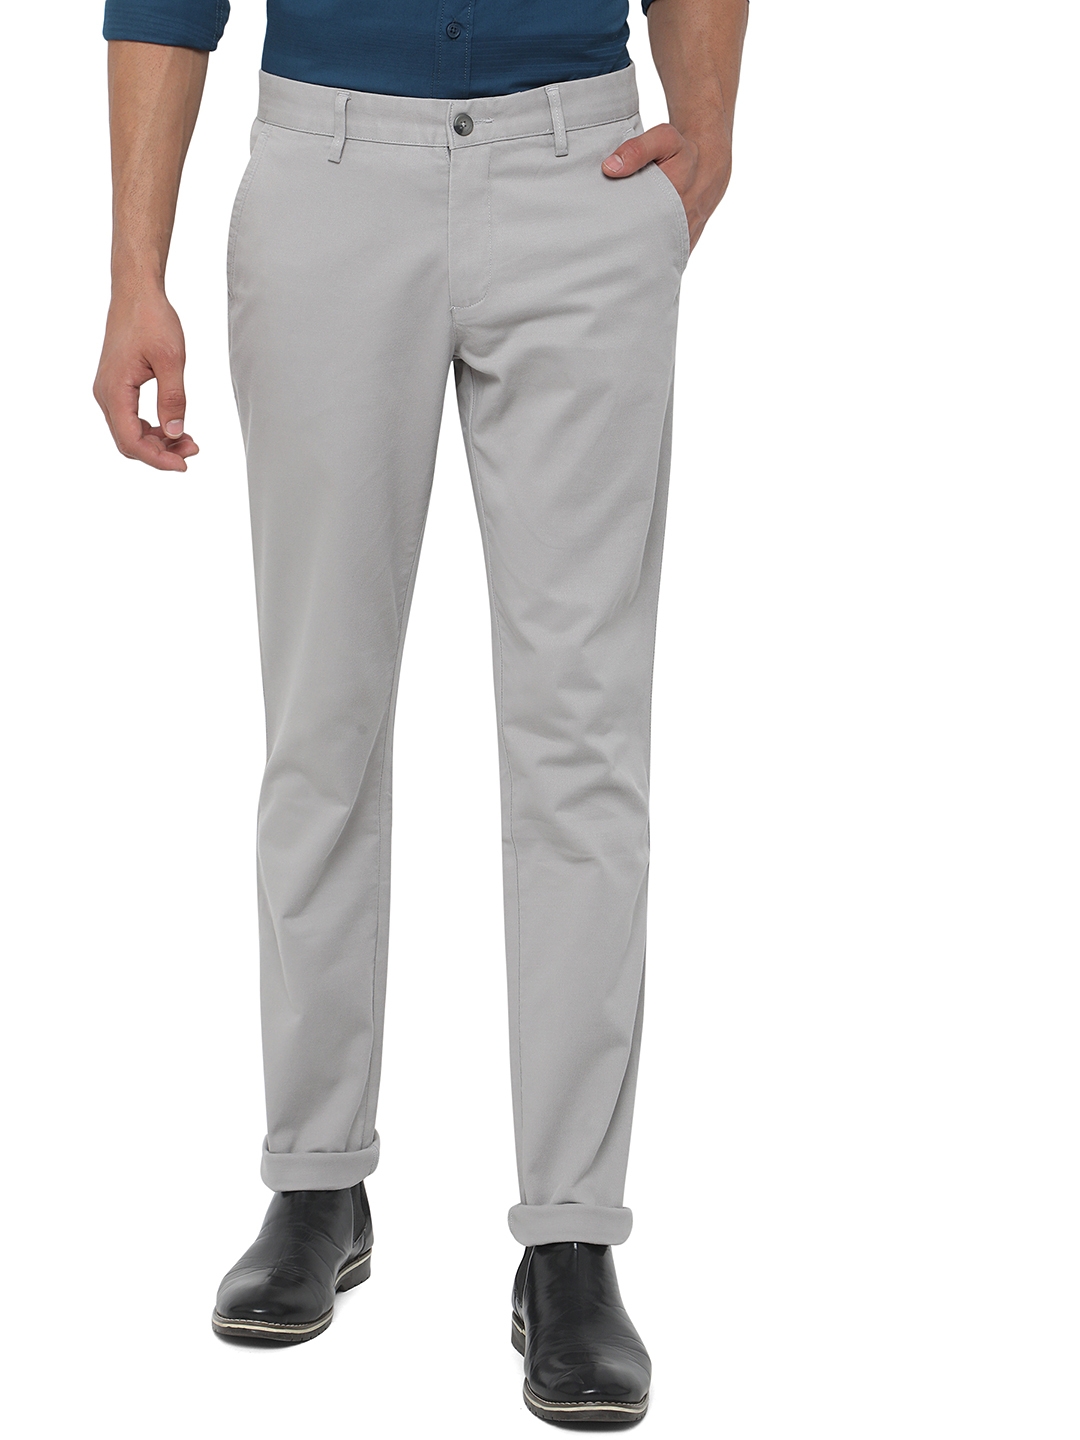 Greenfibre | Light Grey Solid Super Slim Fit Casual Trouser | Greenfibre